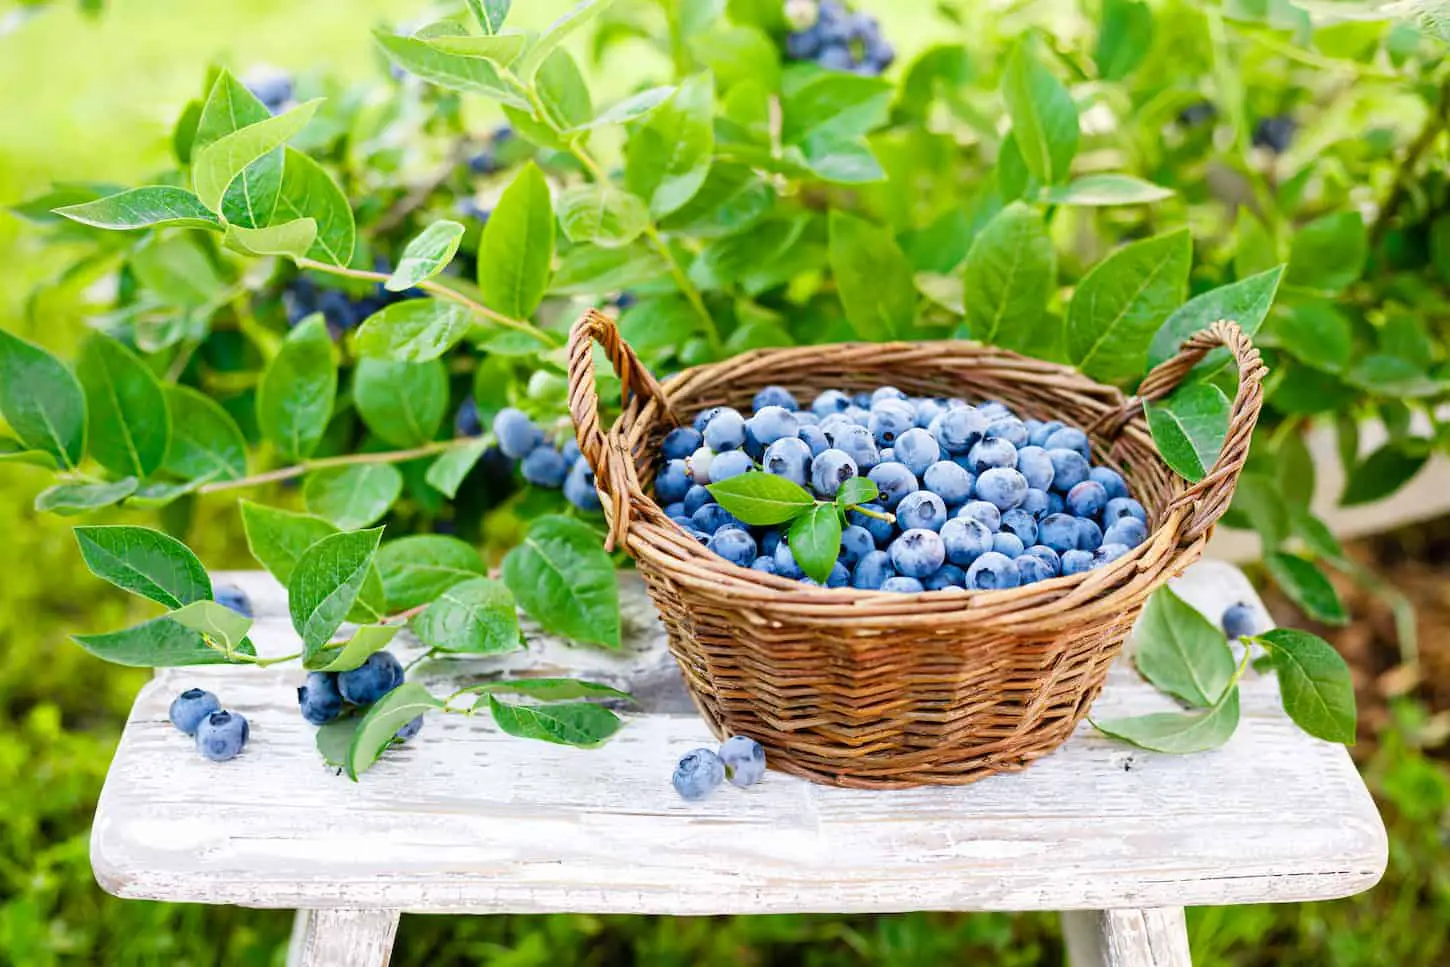 An image of fresh blueberries in a basket on top of a mini table surrounded by blueberry bush.